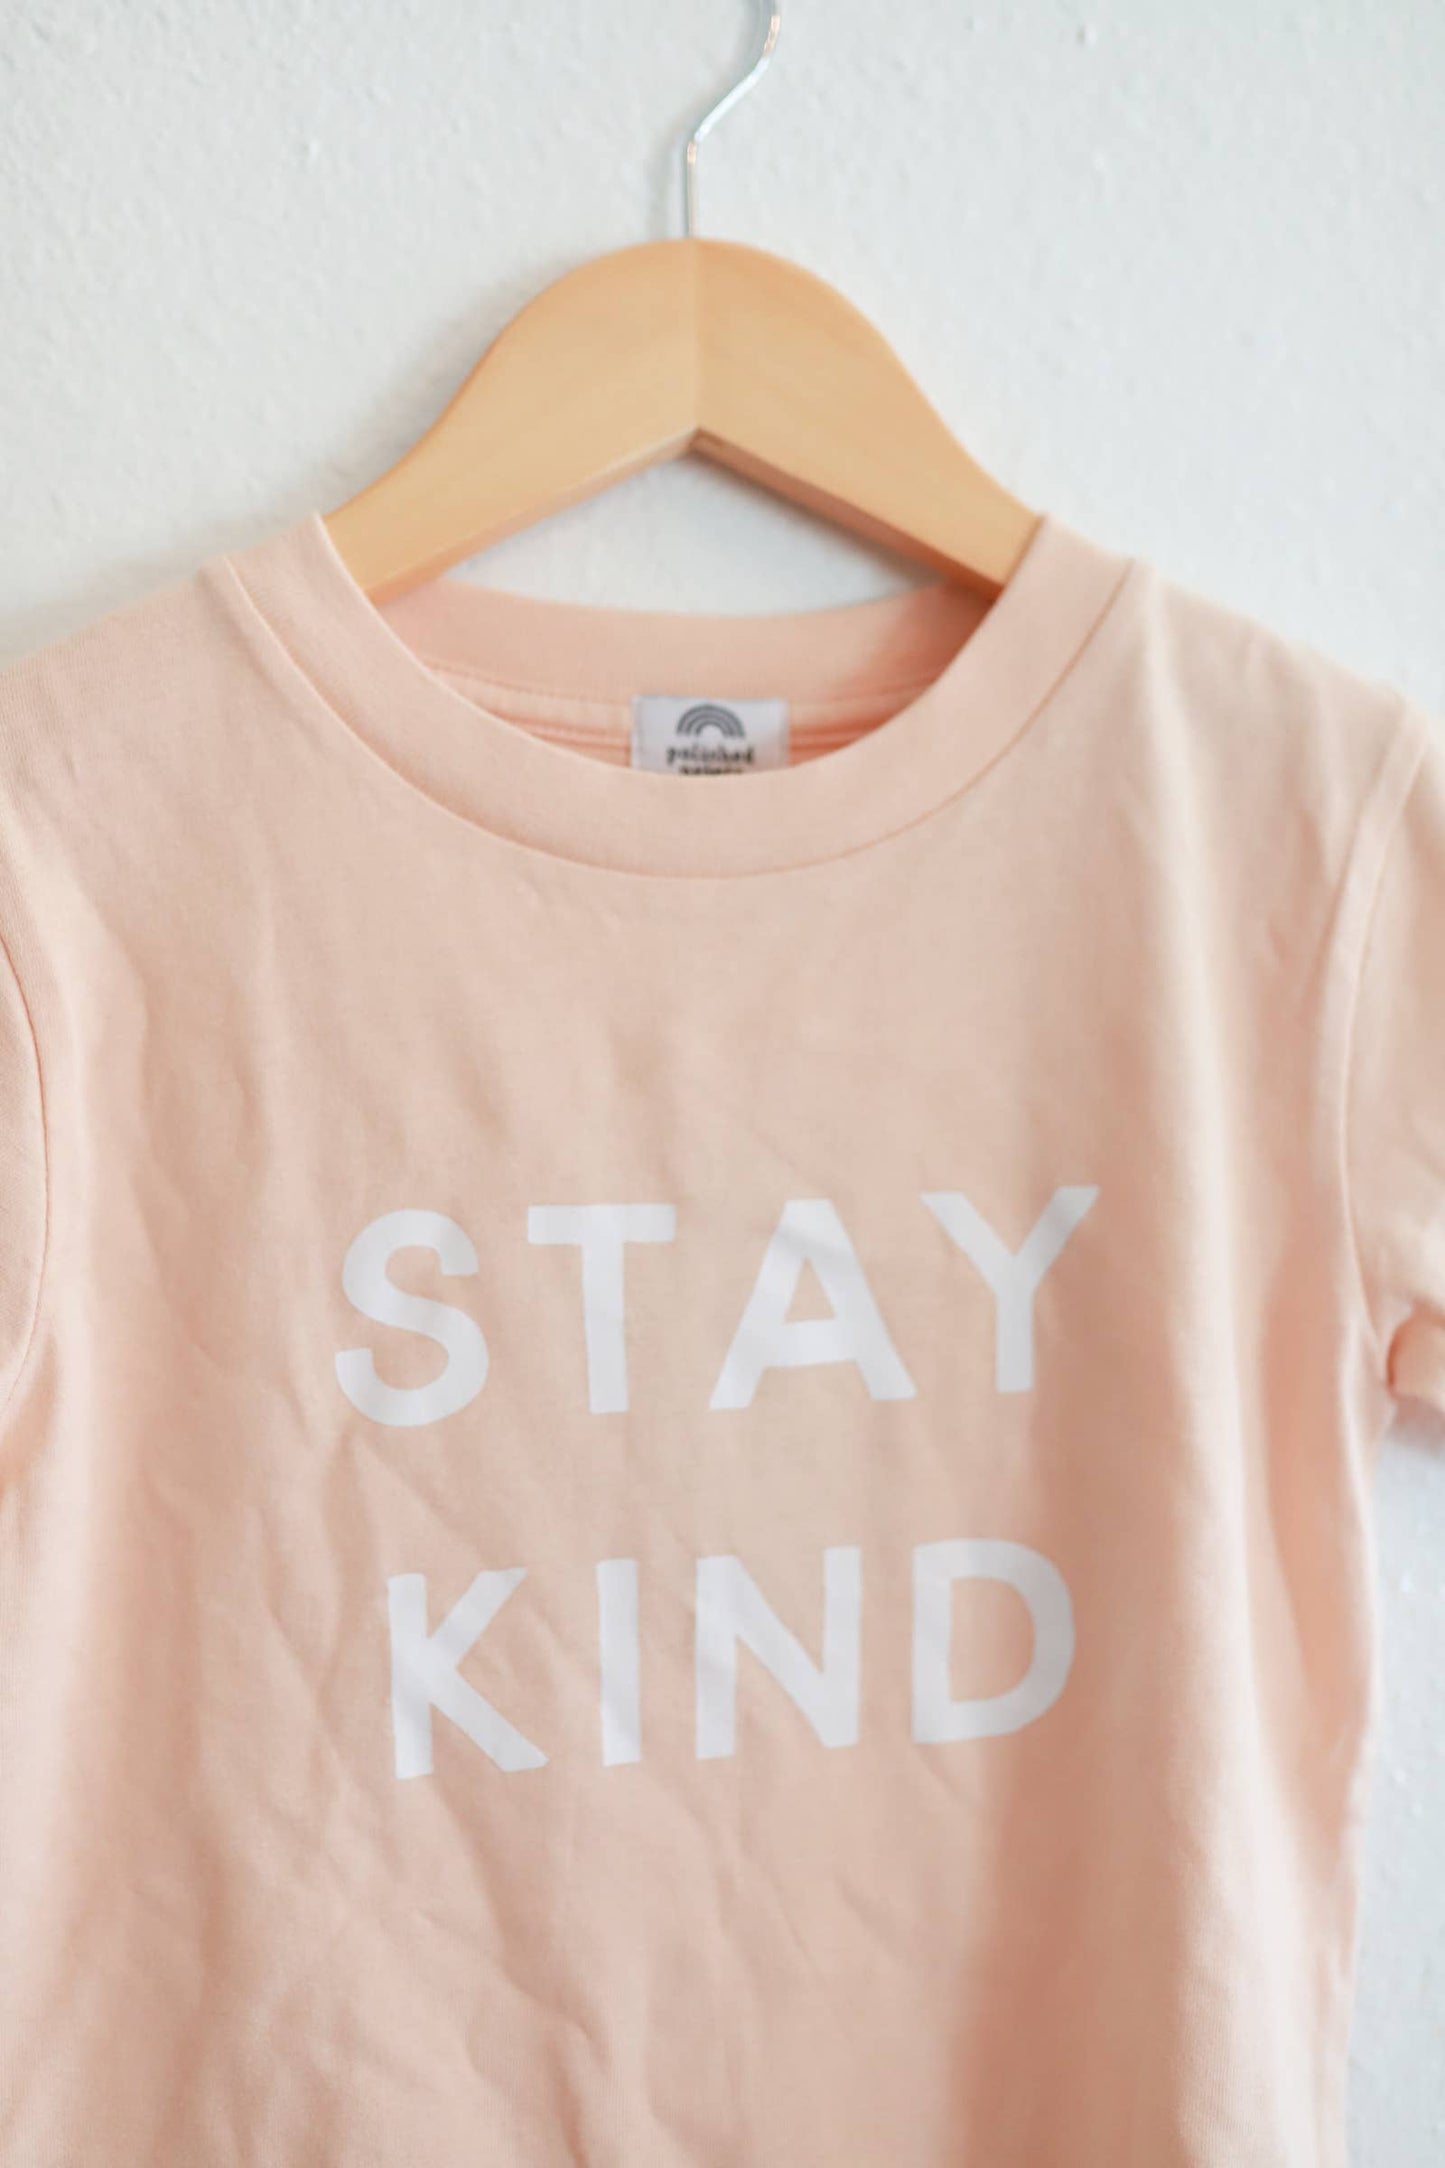 Stay Kind in Sunkiss, Toddler tee, Graphic Shirts, Kids Tee